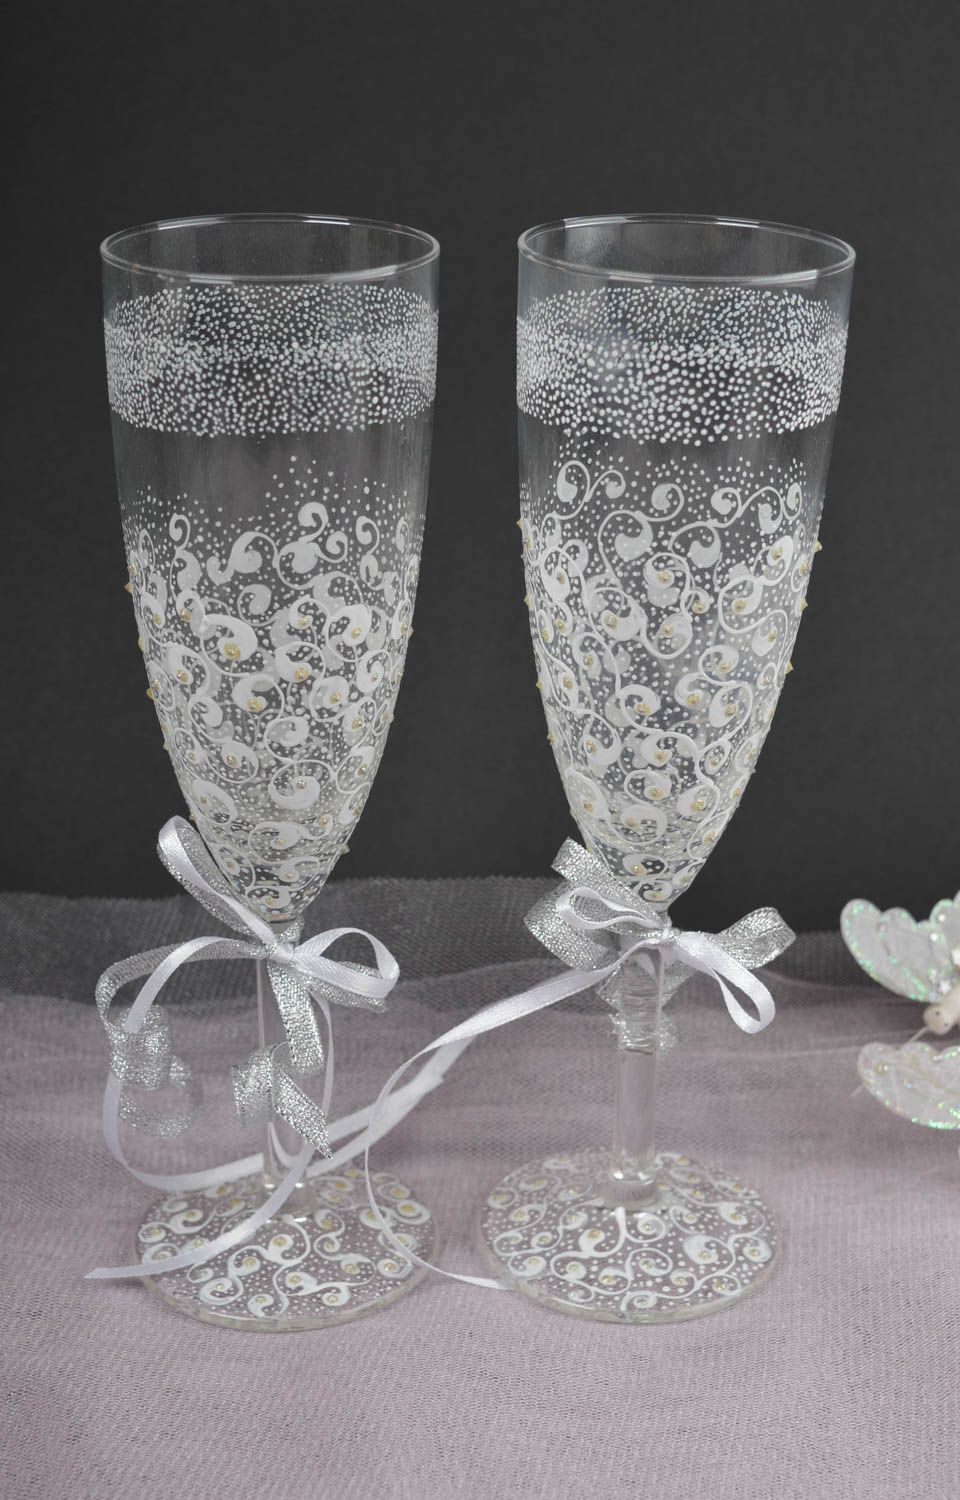 Handmade glasses unusual glasses for newlyweds wedding accessories gift ideas photo 1